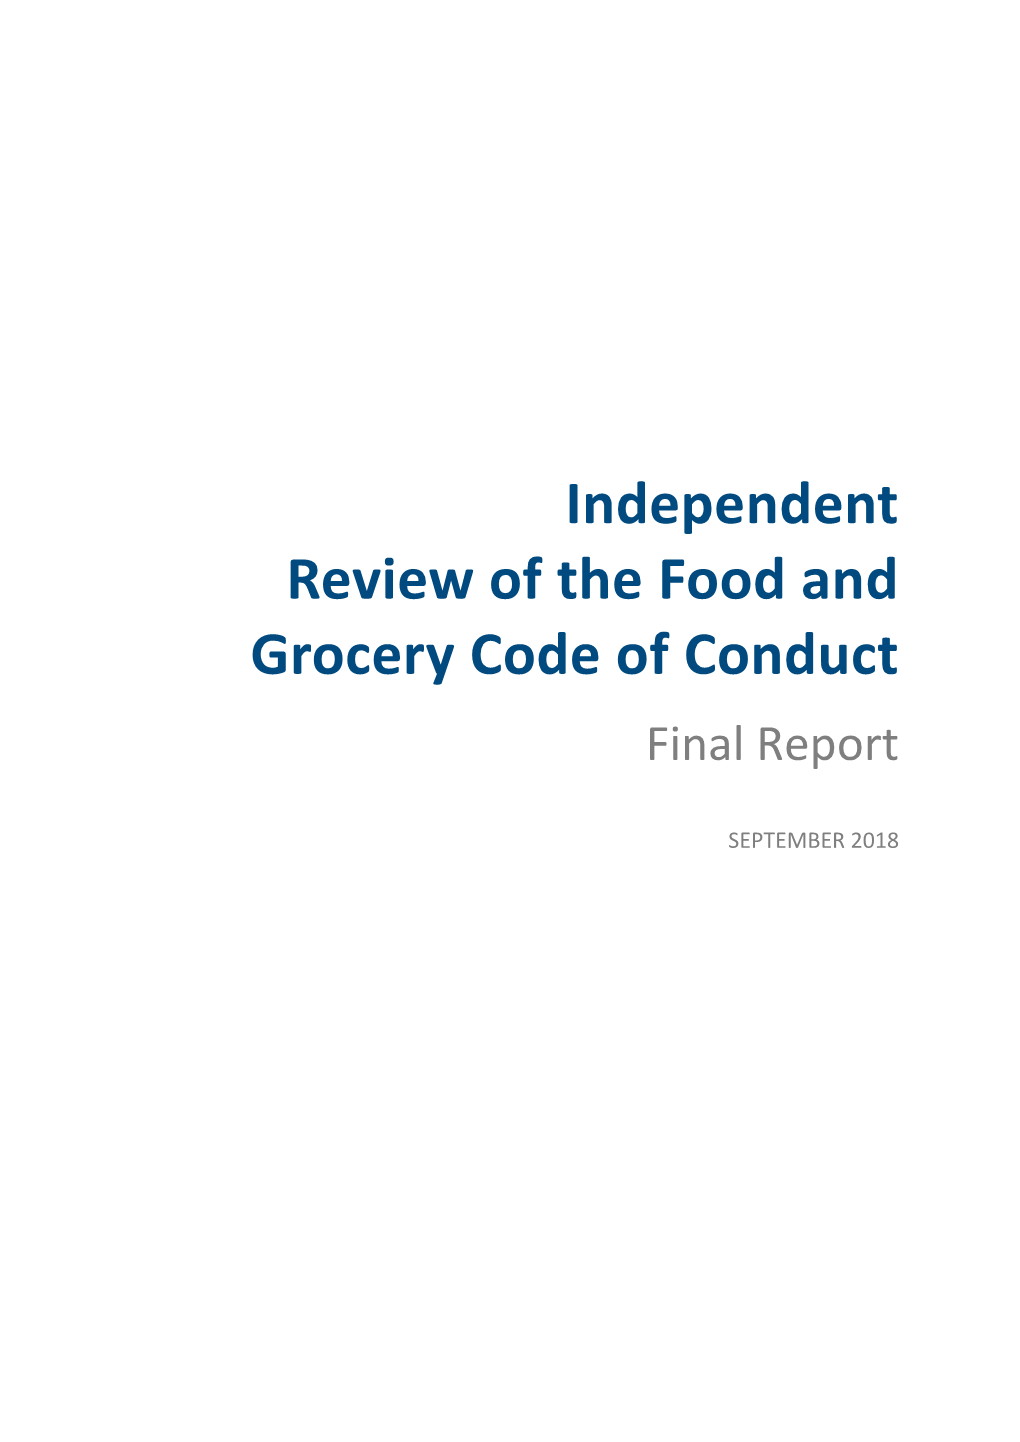 Independent Review of the Food and Grocery Code of Conduct Final Report